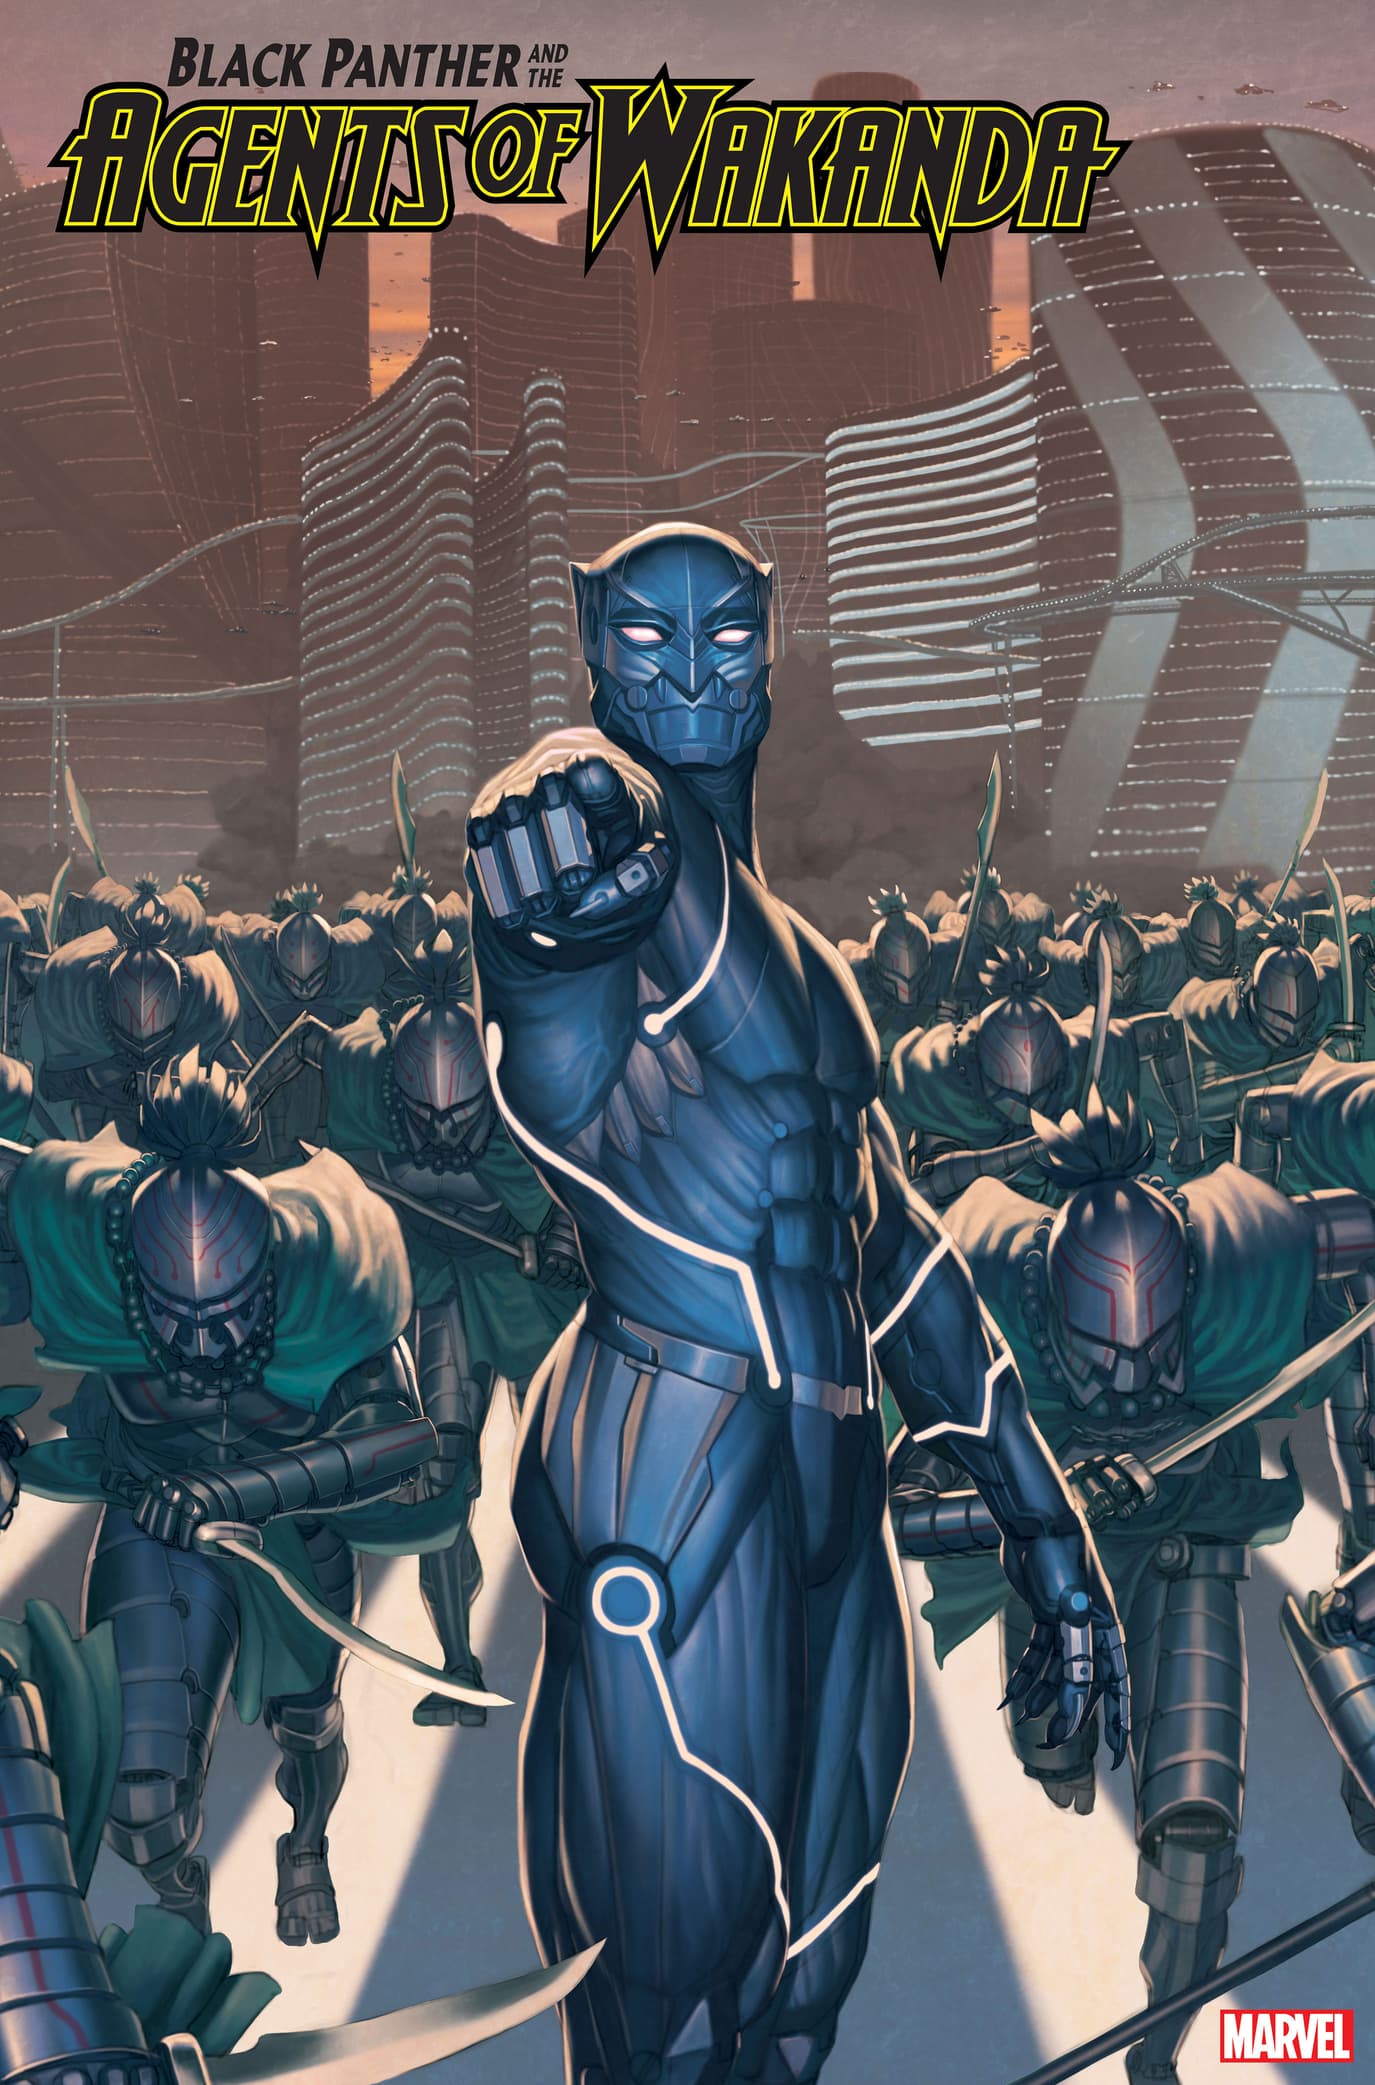 Black Panther and the Agents of Wakanda 2099 variant cover